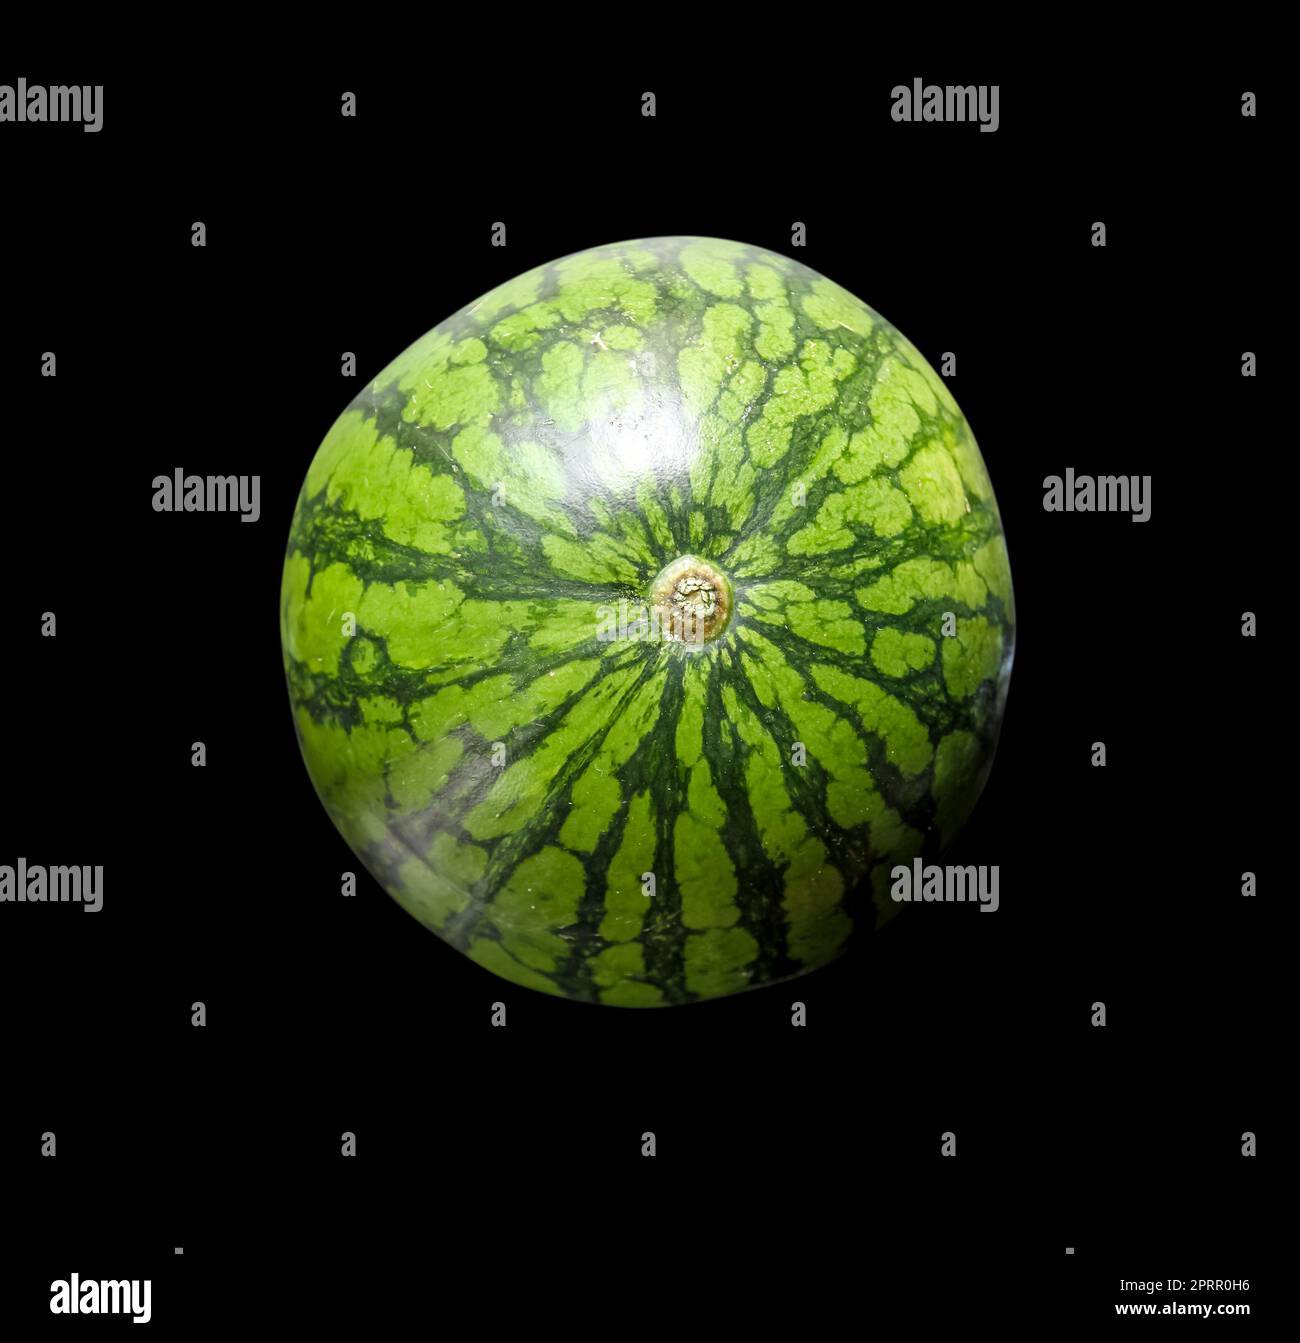 Watermelon isolated on black background Stock Photo